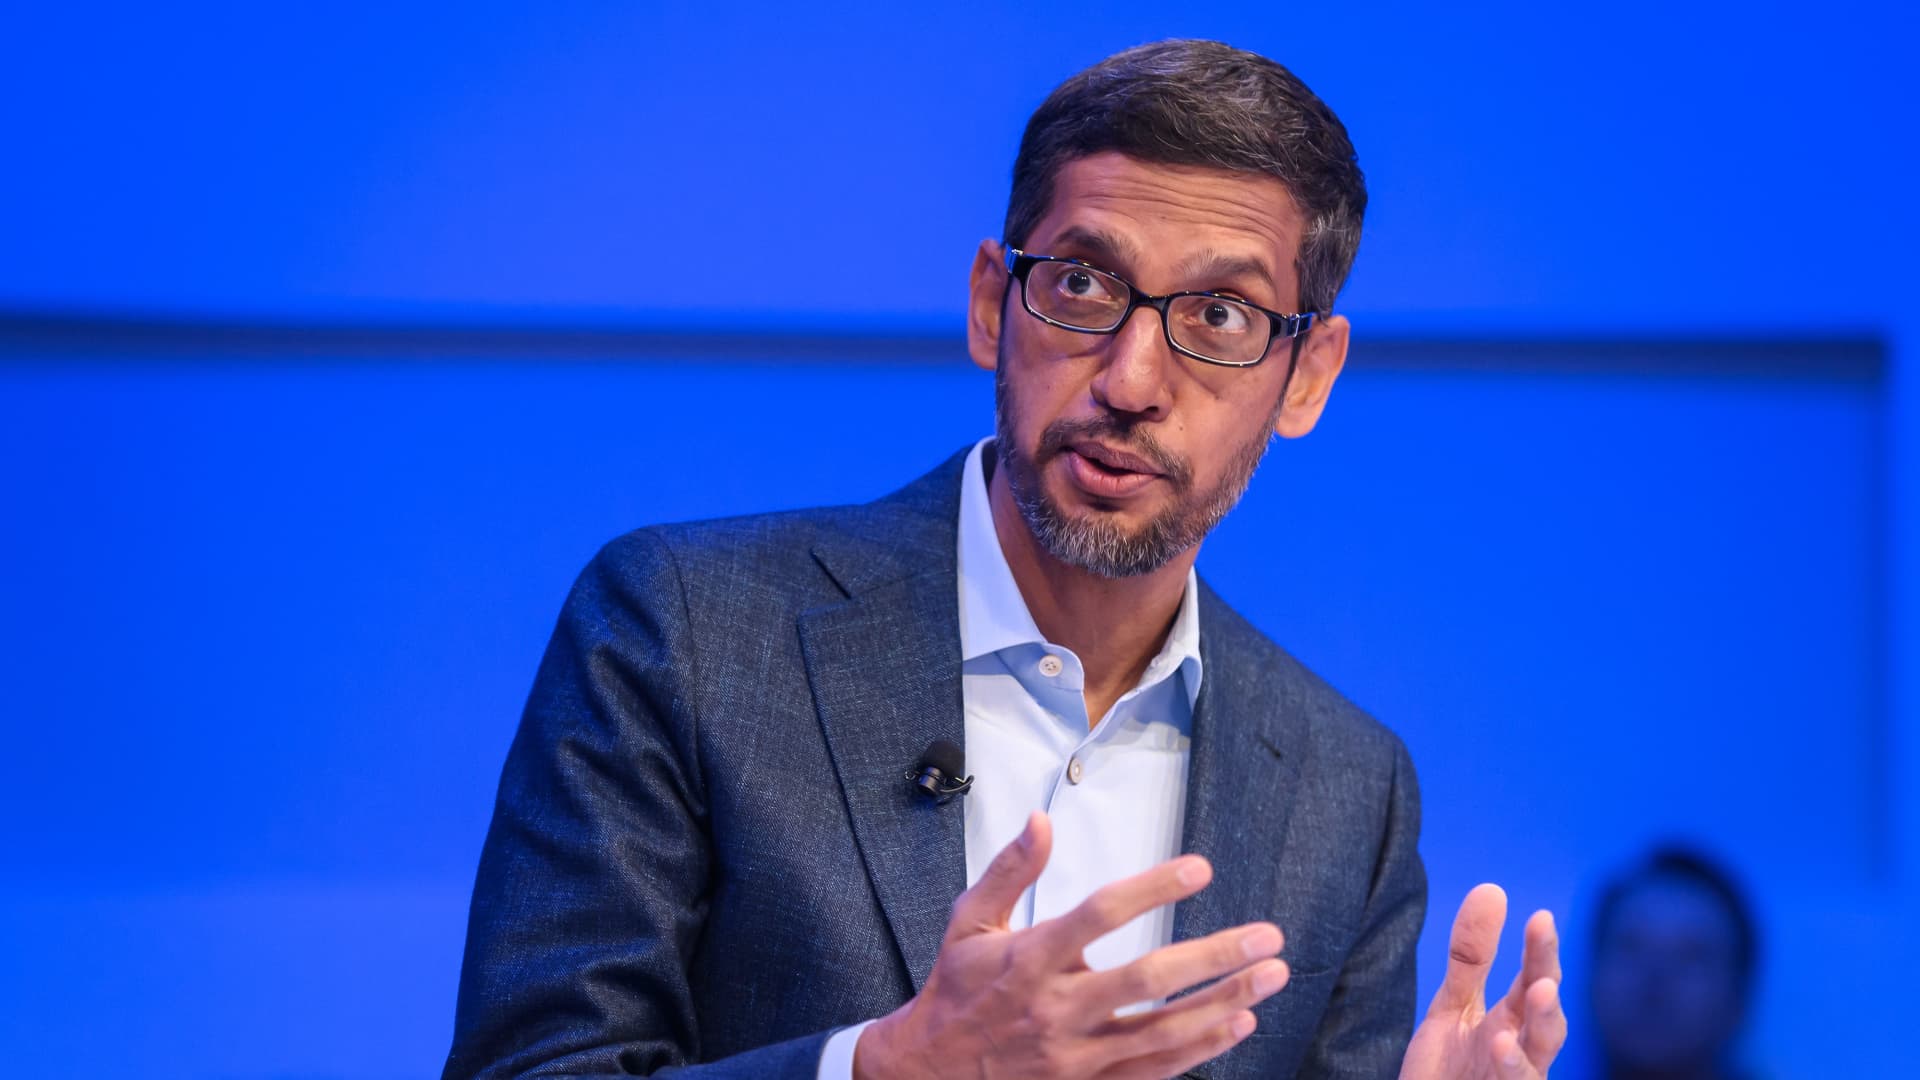 Google CEO says he hopes to make company '20% more' efficient, hints at potential cuts